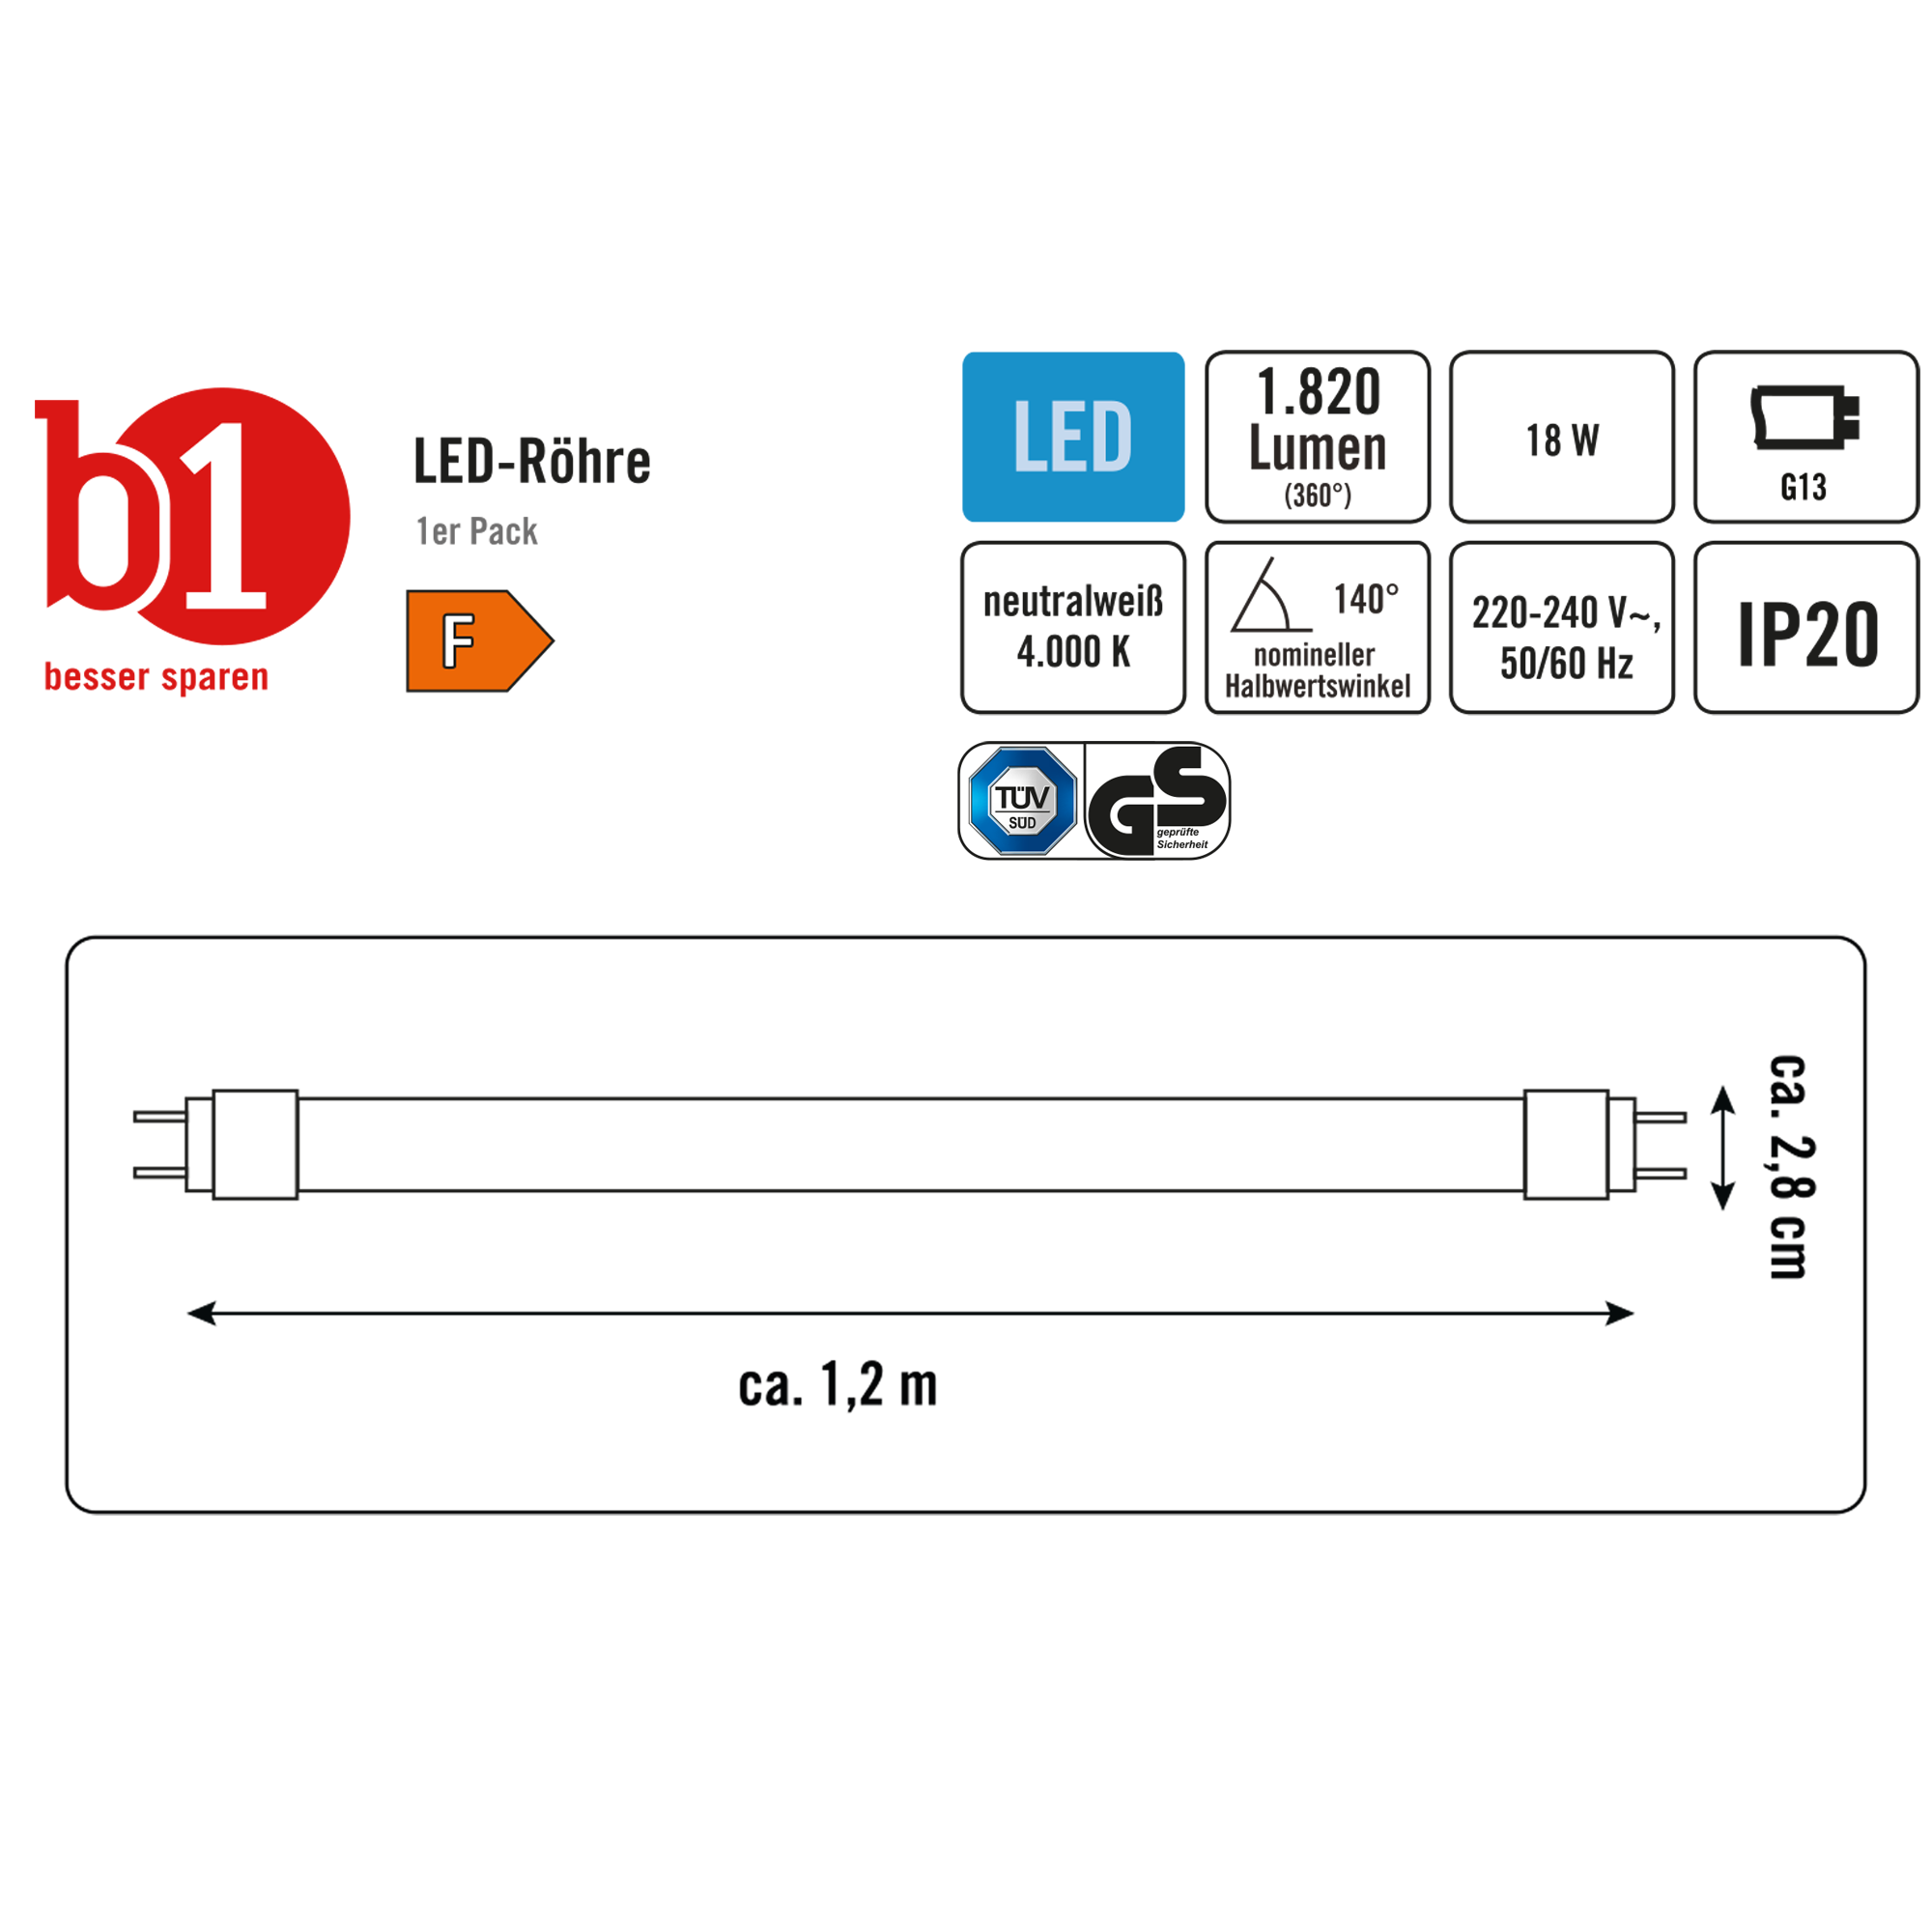 LED-Röhre 120 cm, G13 18 W 1820 lm neutralweiß 4000K + product picture